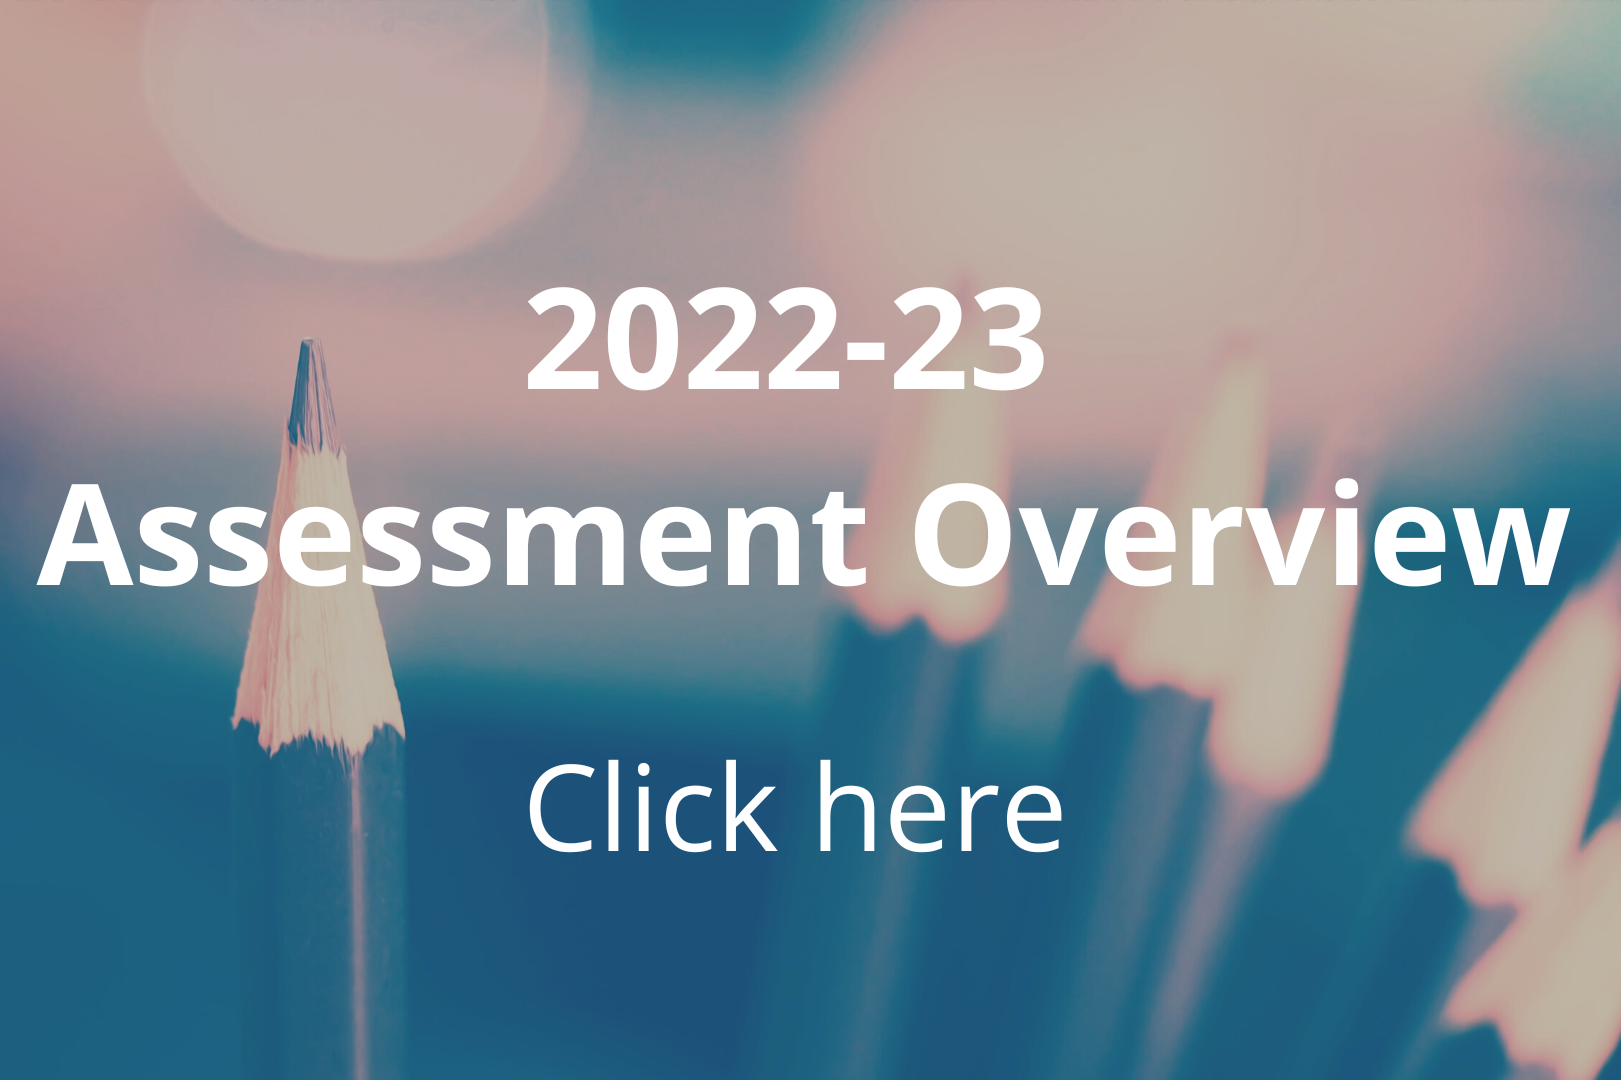 Click here to access the 2022-23 Assessment Overview